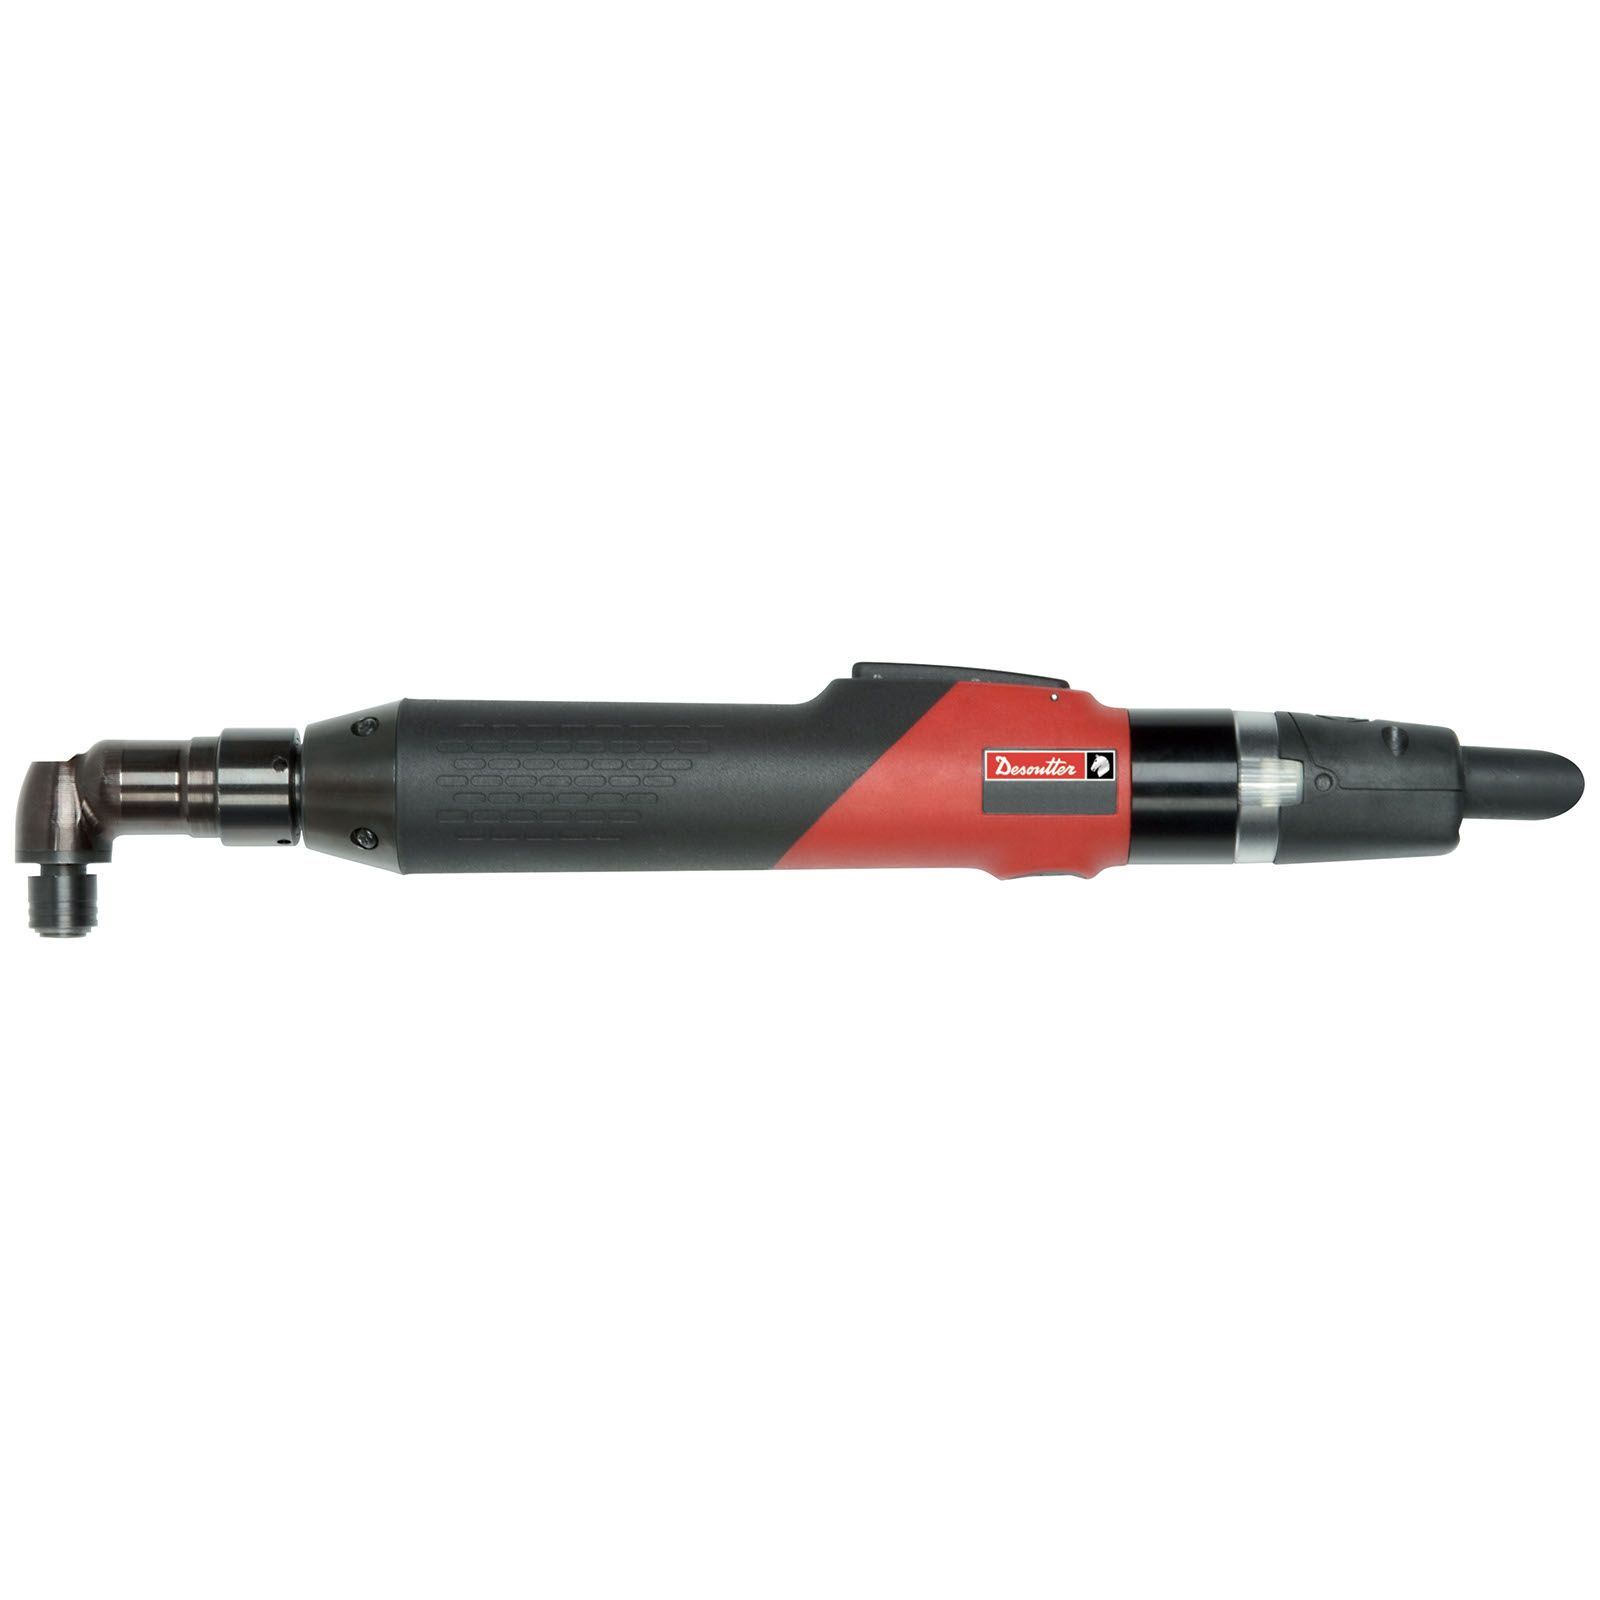 ECS - Current Controlled In-Line Screwdriver product photo